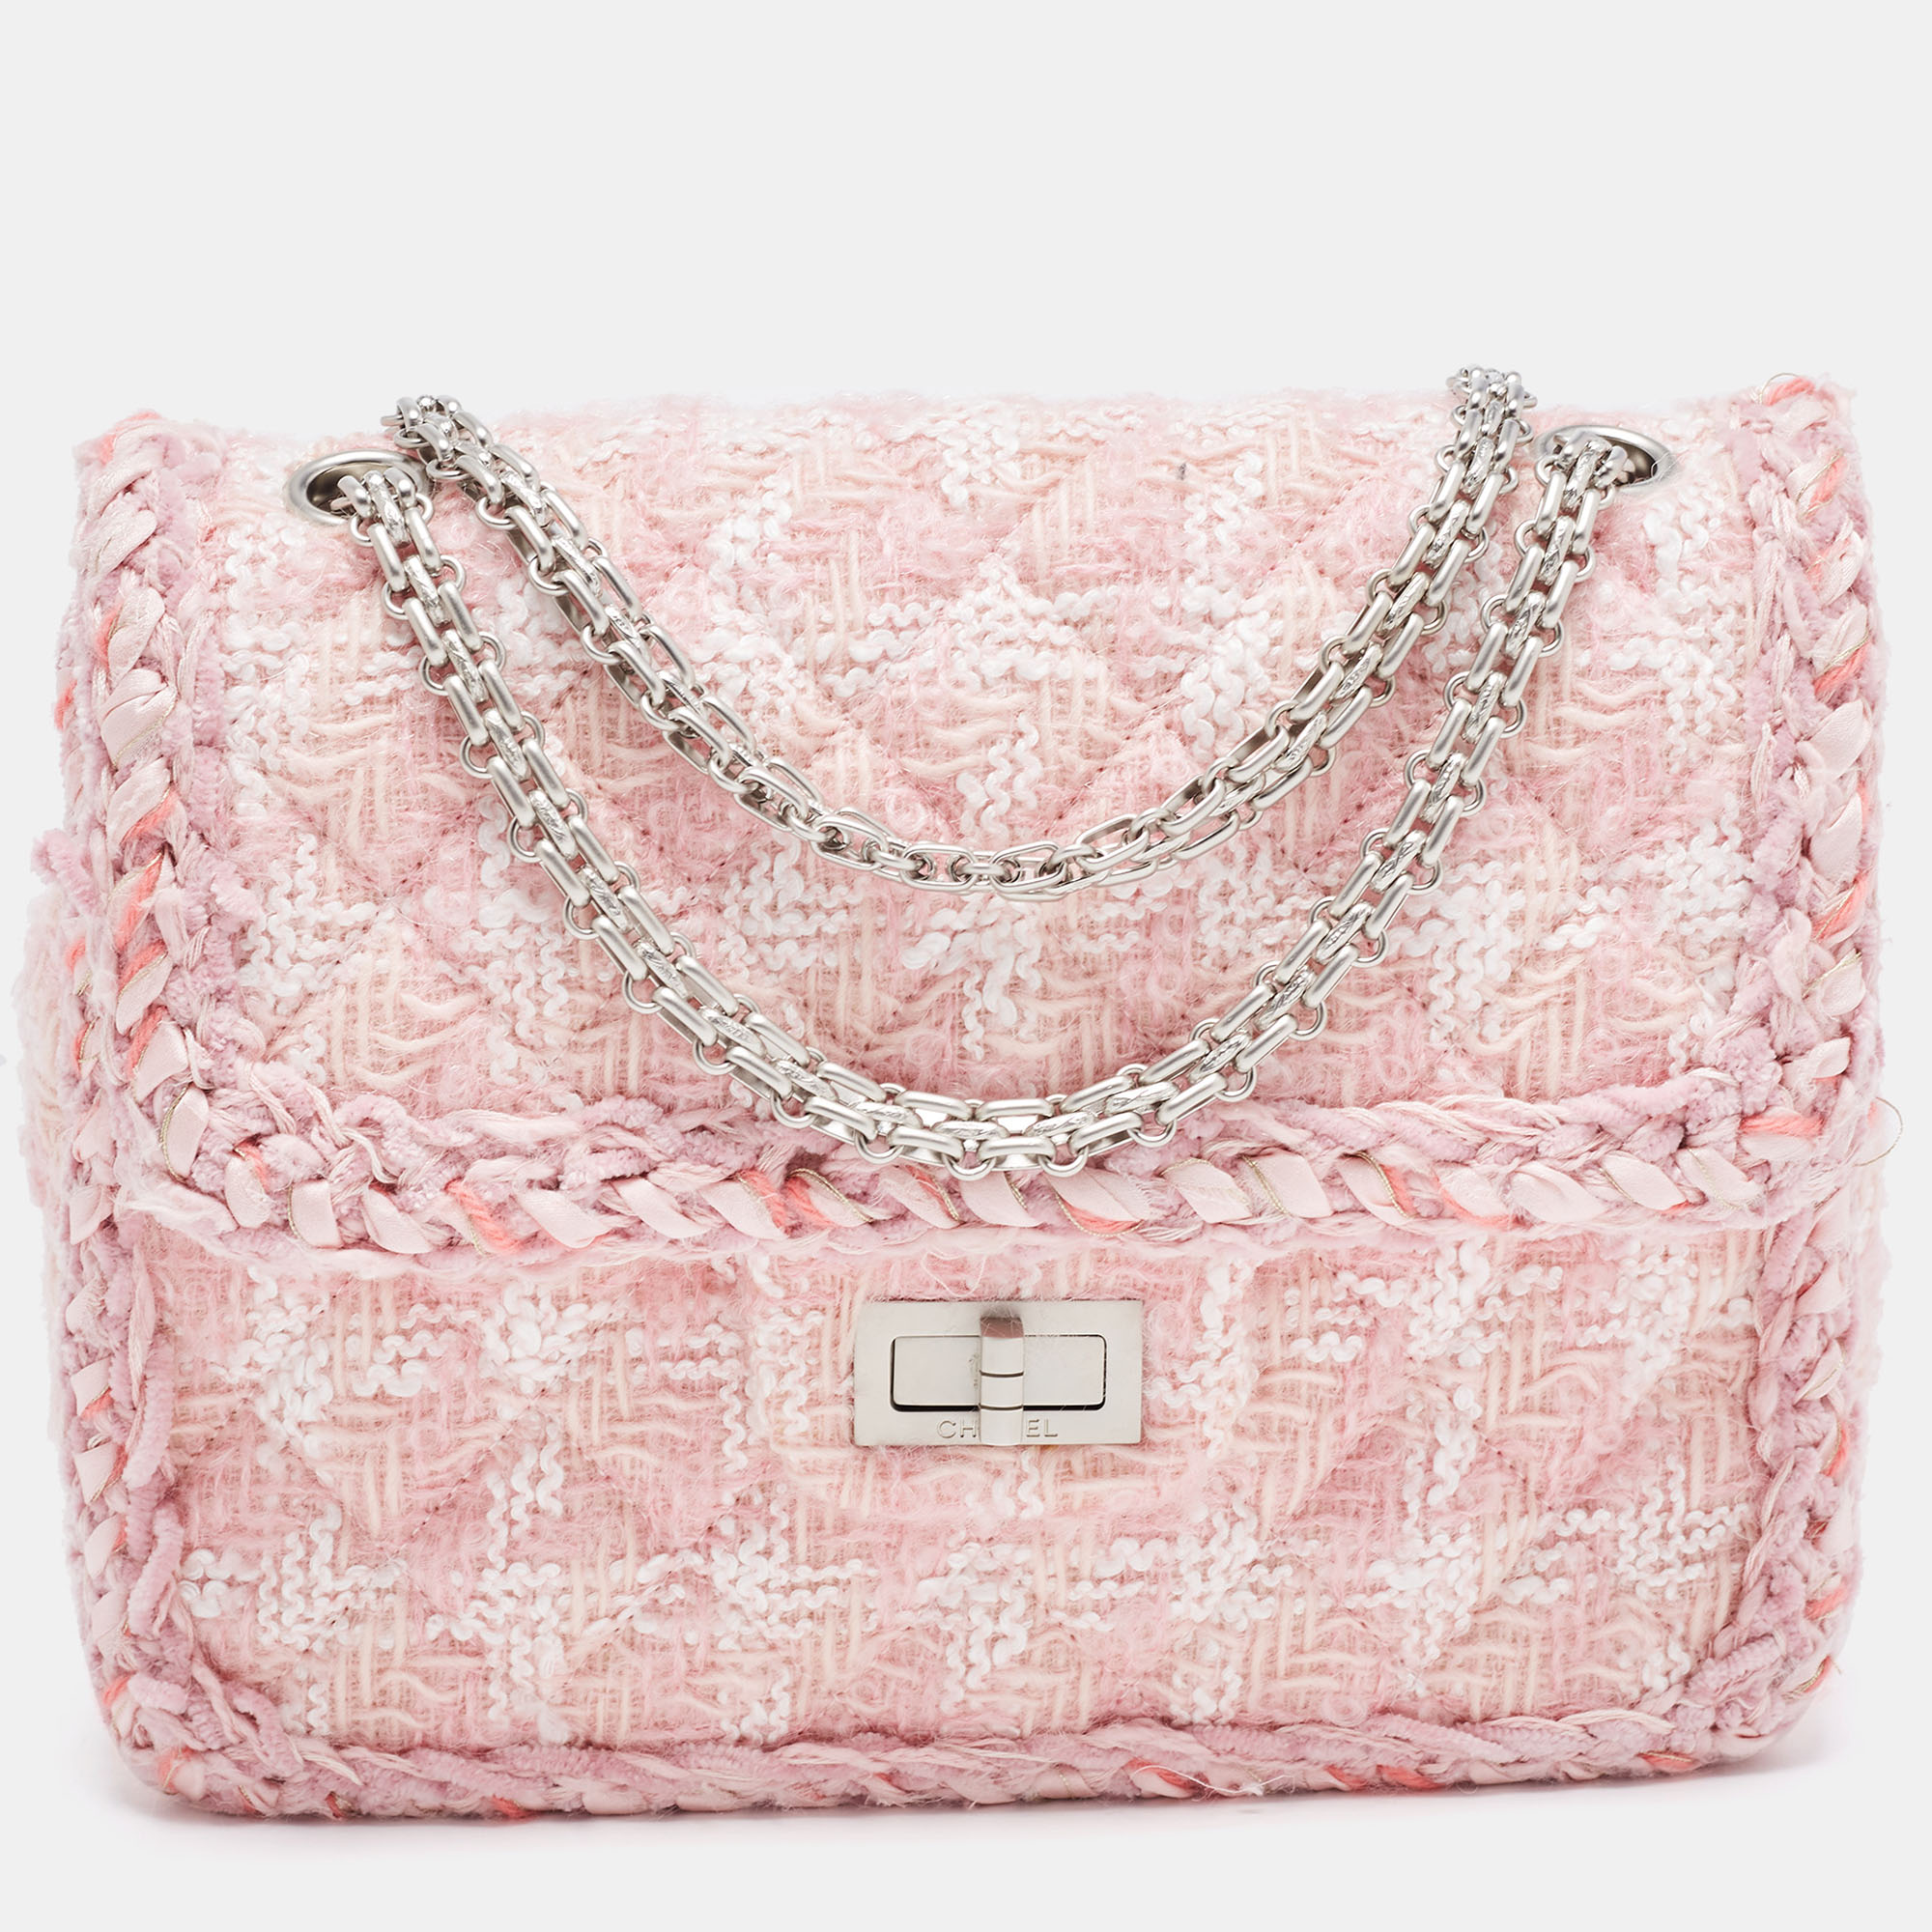 Chanel Pink Quilted Tweed Square Reissue 2.55 Flap Bag